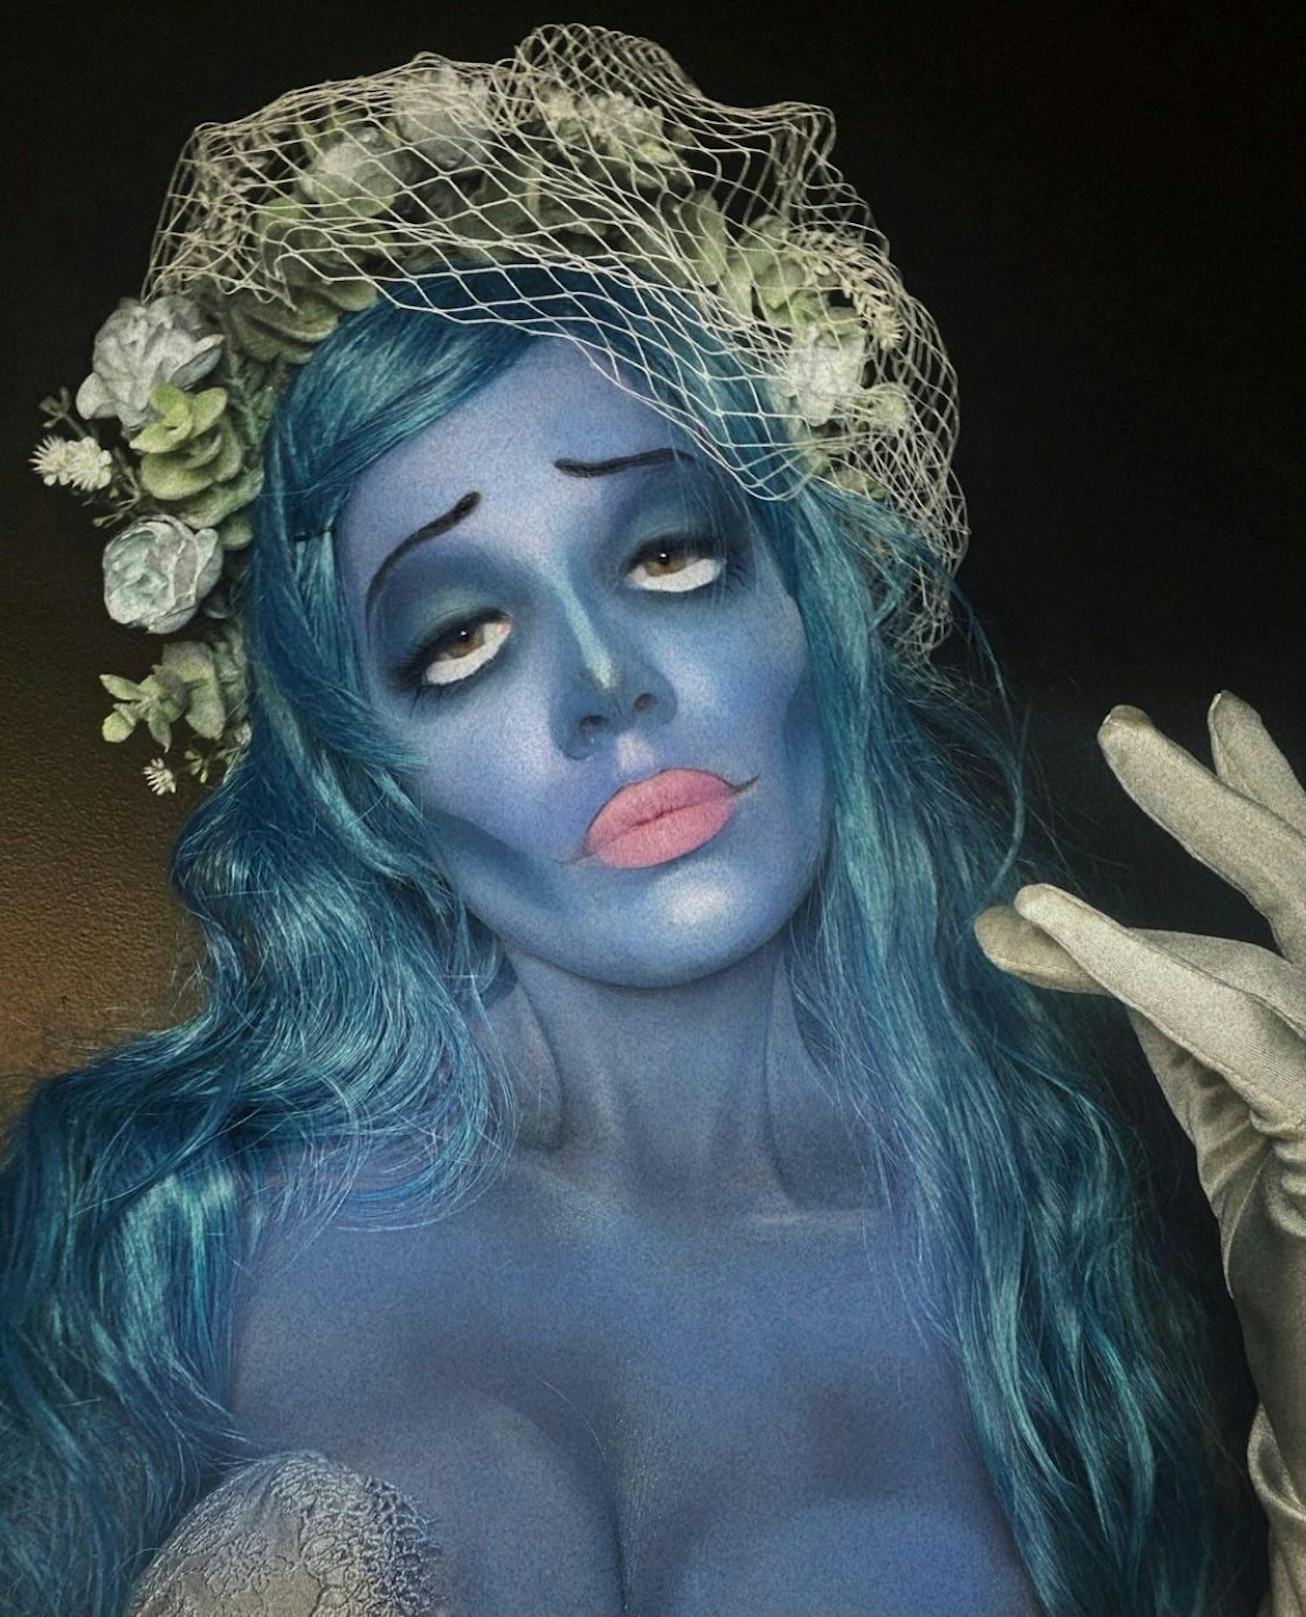 Singer Halsey dressed up as Emily the corpse bride from Tim Burtons Corpse Bride film